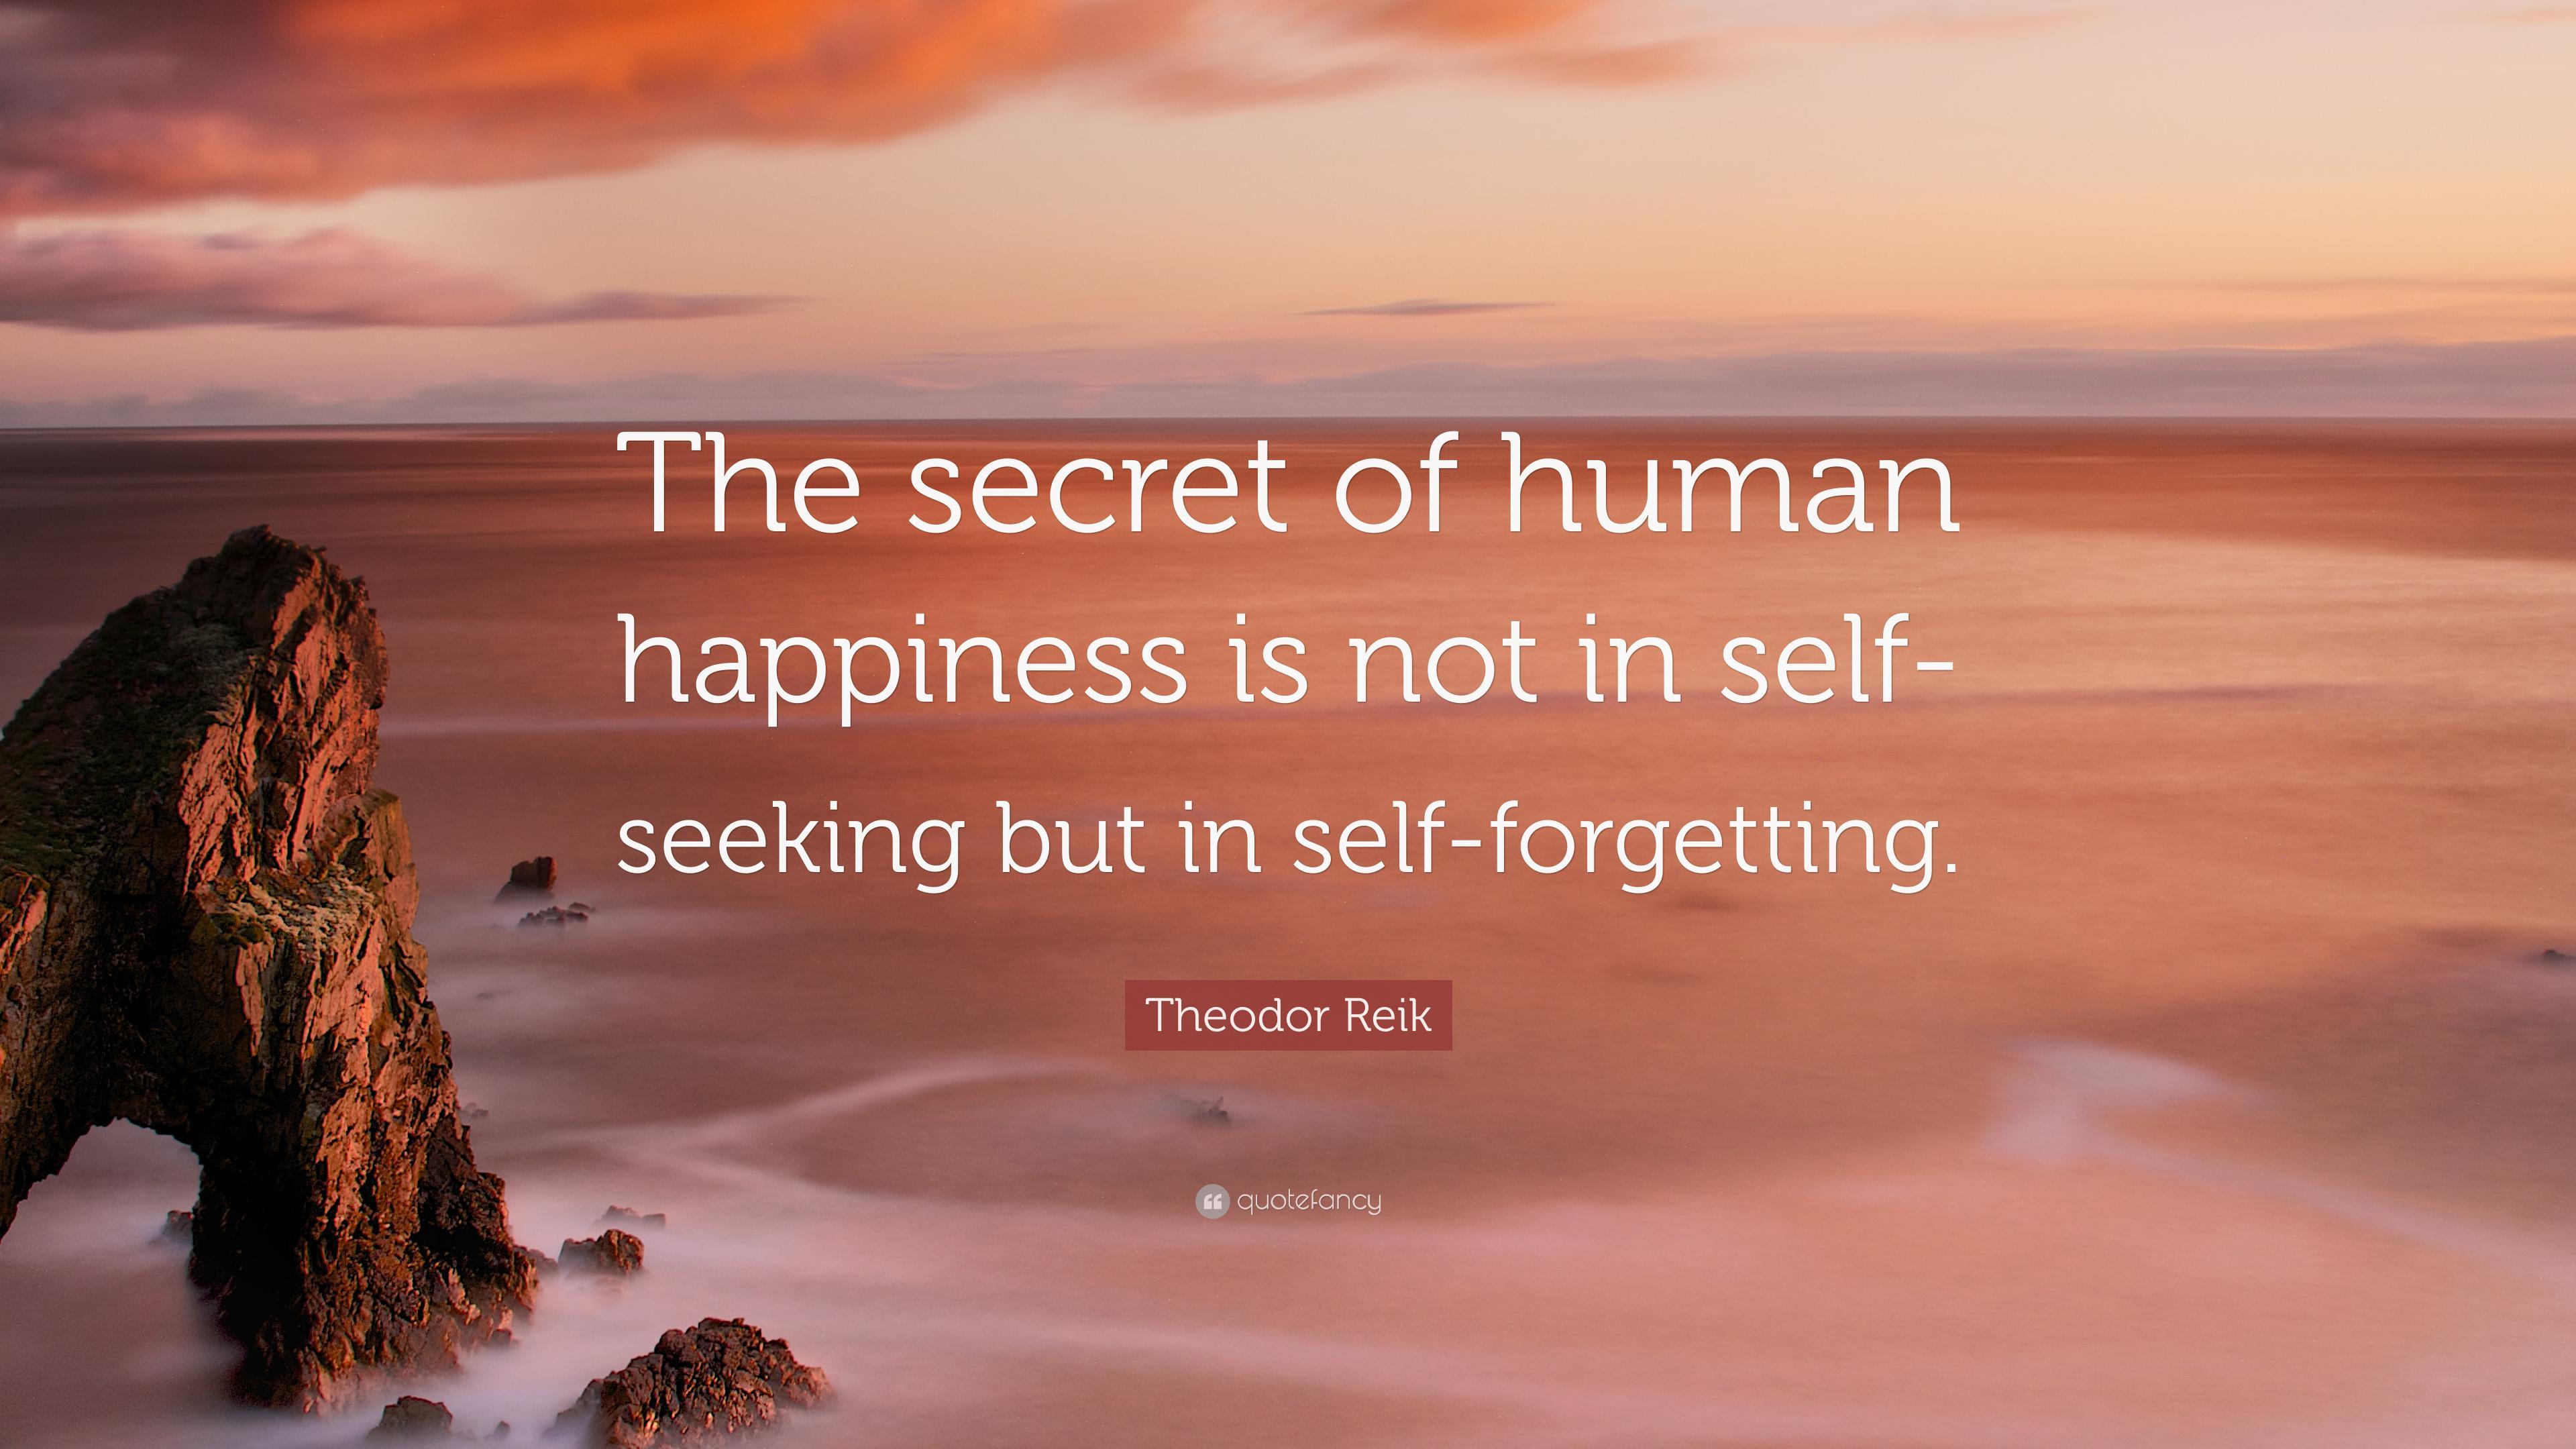 Theodor Reik Quote: “The secret of human happiness is not